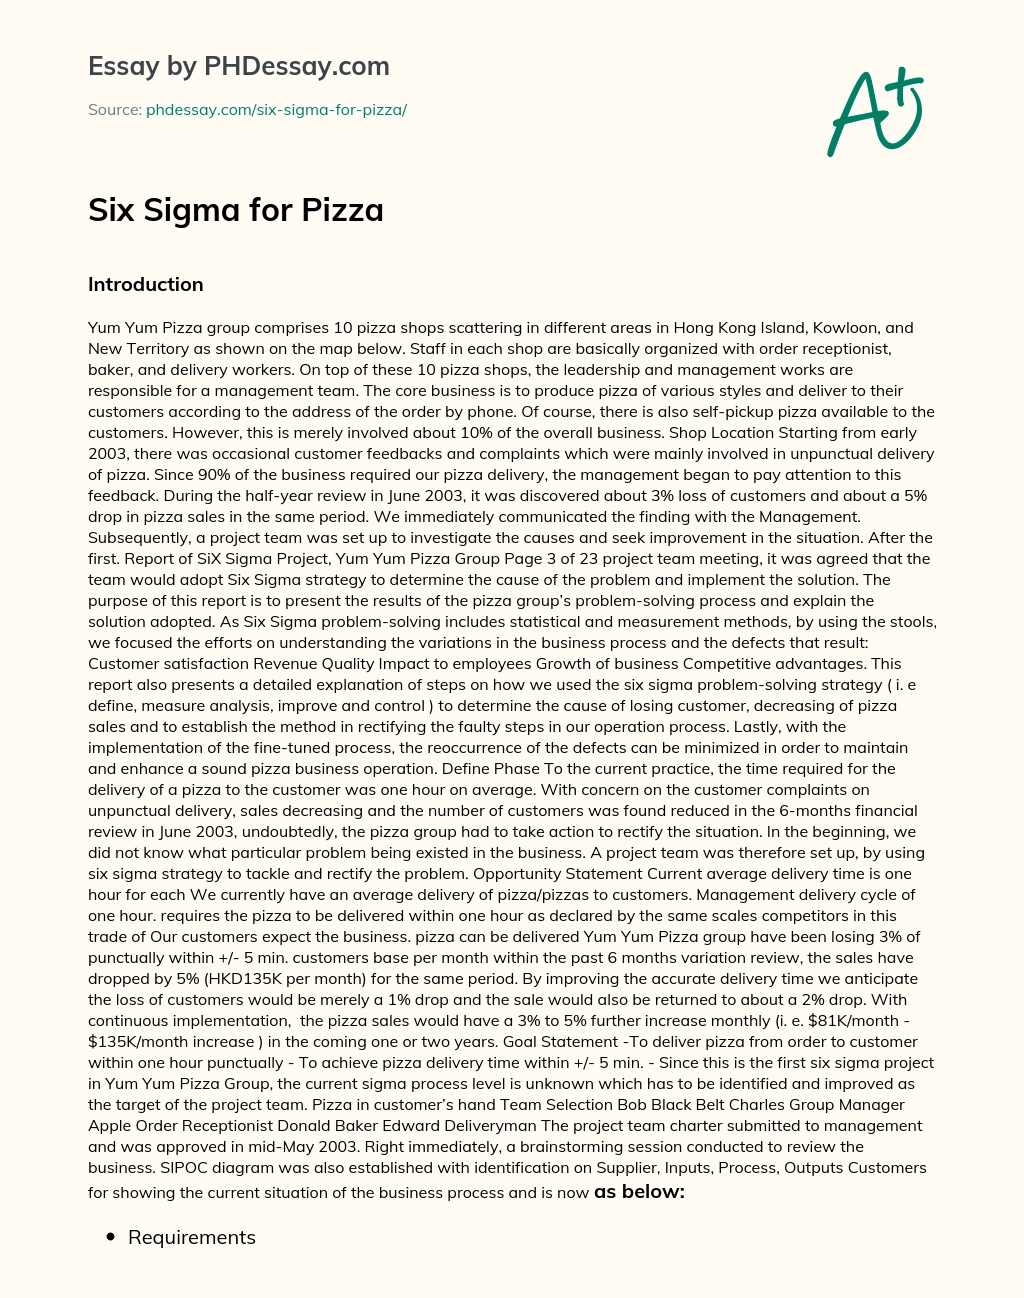 Six Sigma for Pizza essay